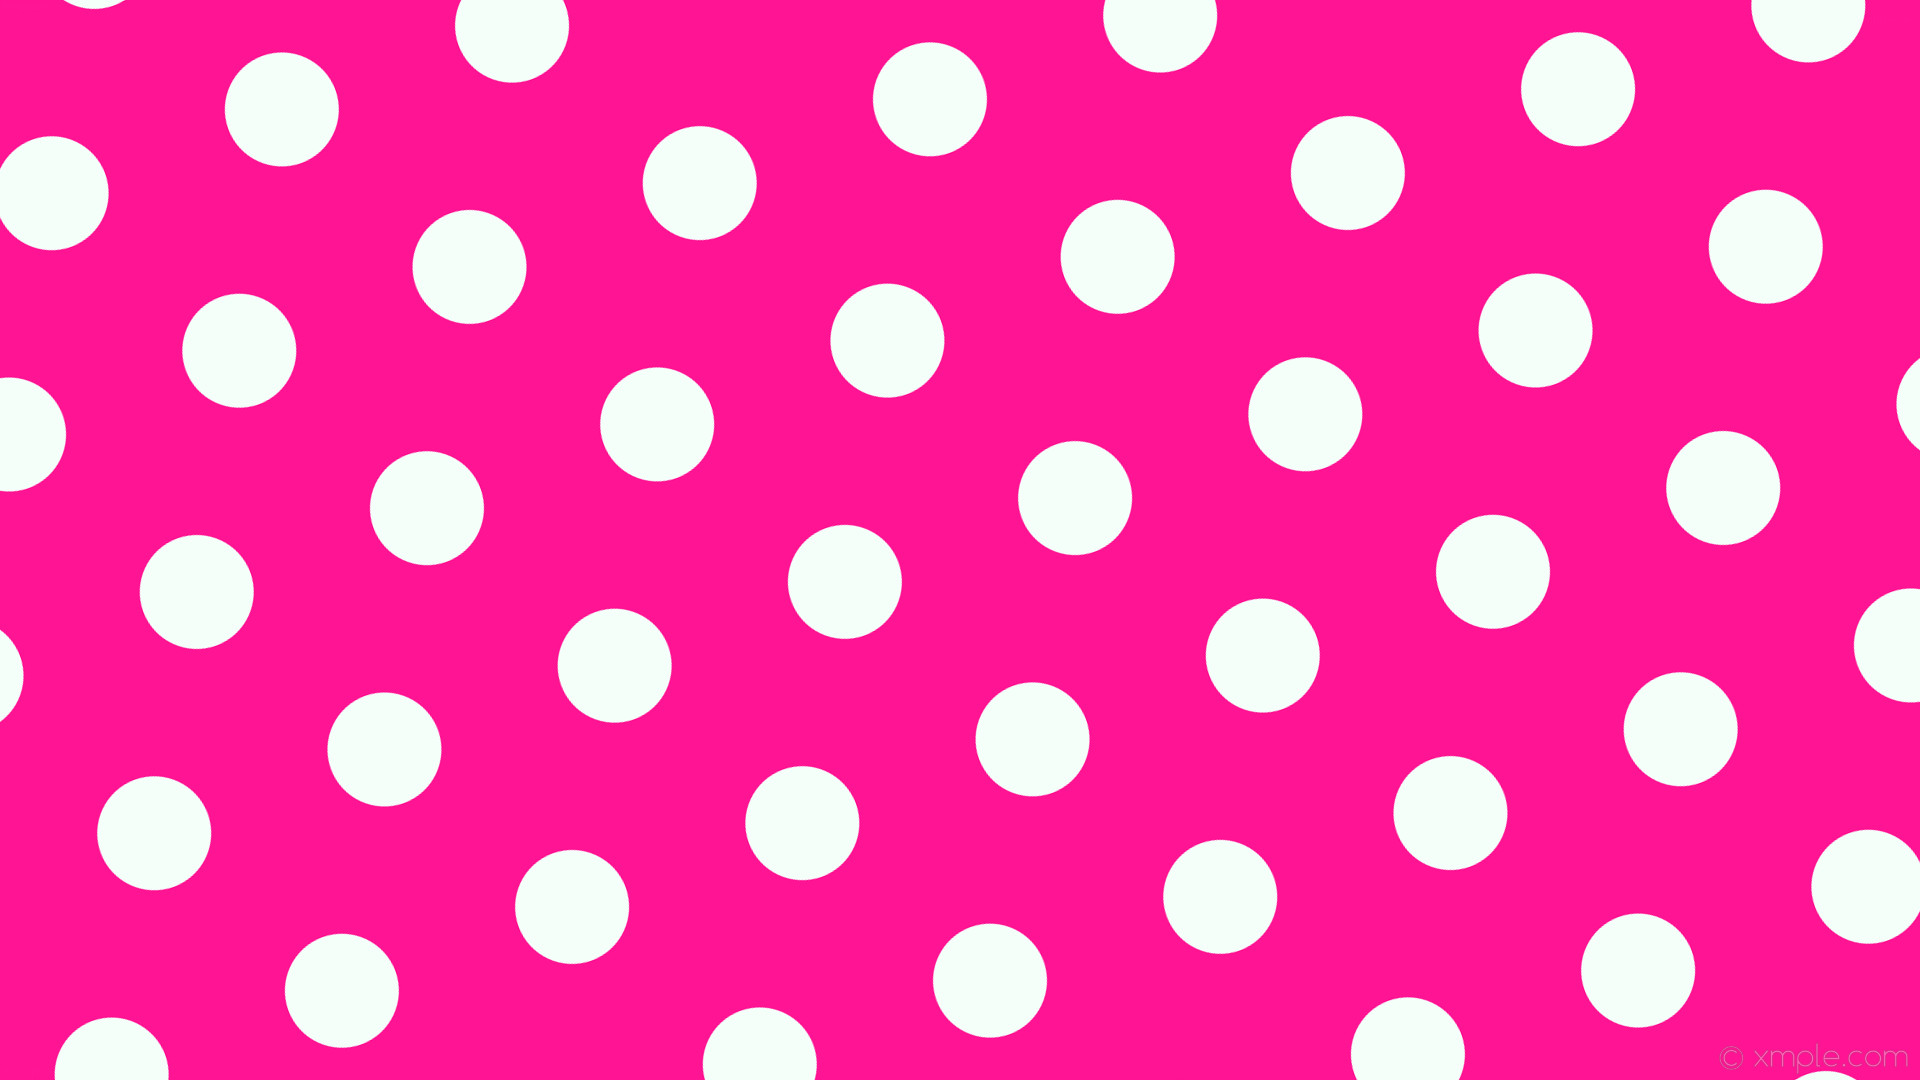 10. Pink and White French Nails with Polka Dots - wide 2